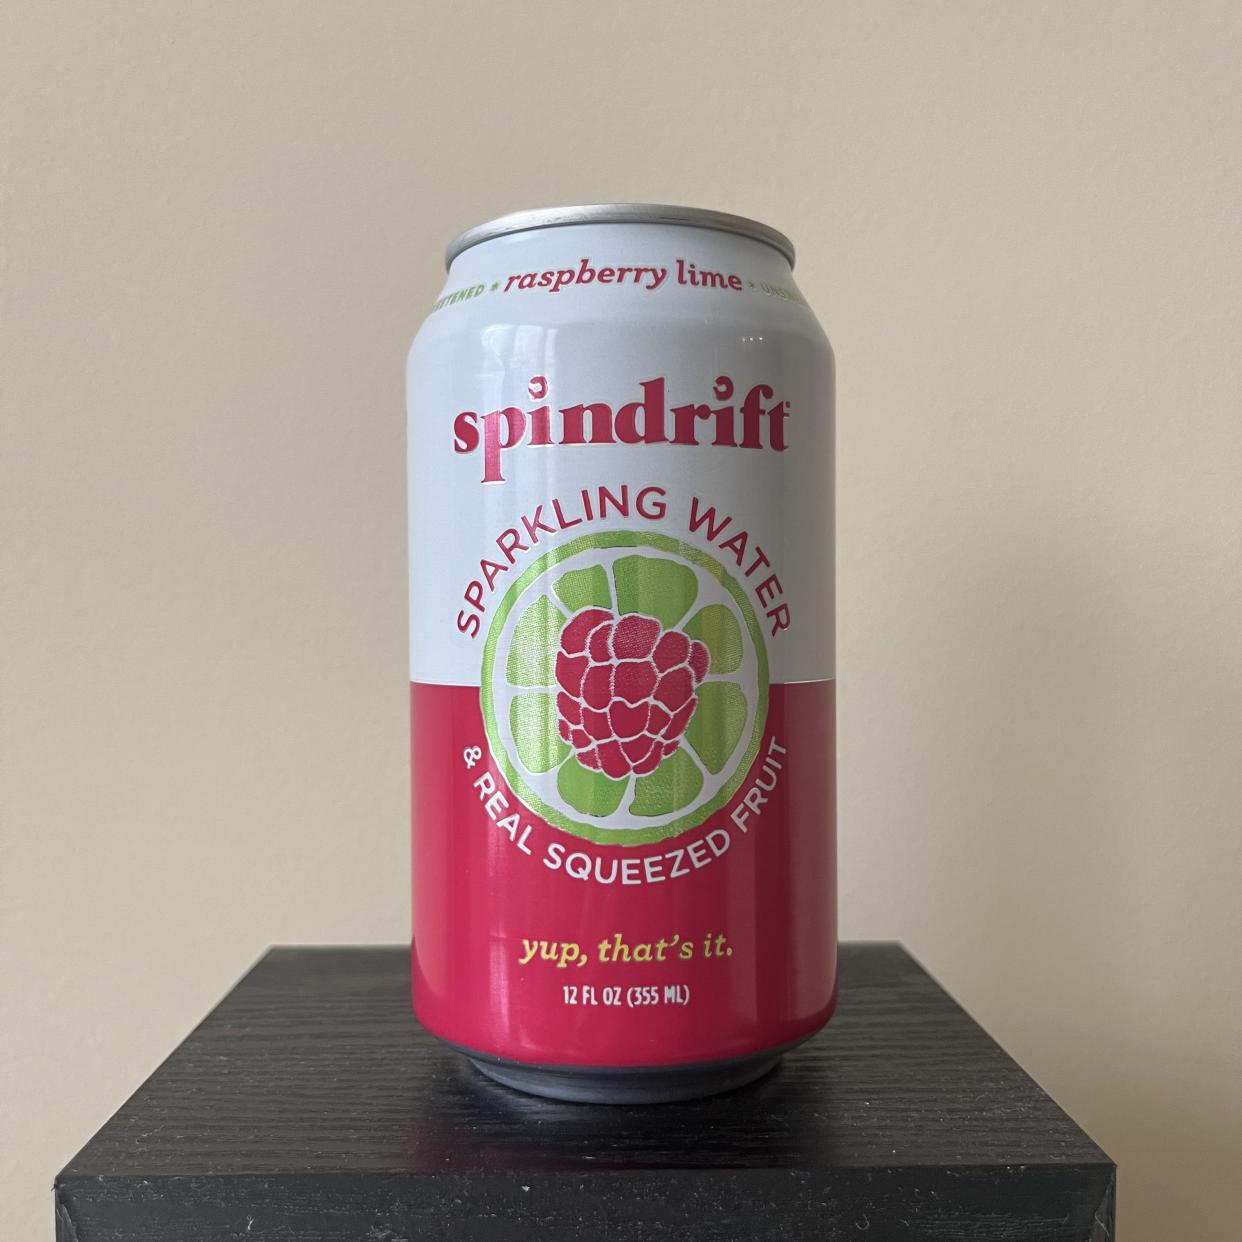 a can of spindrift raspberry lime